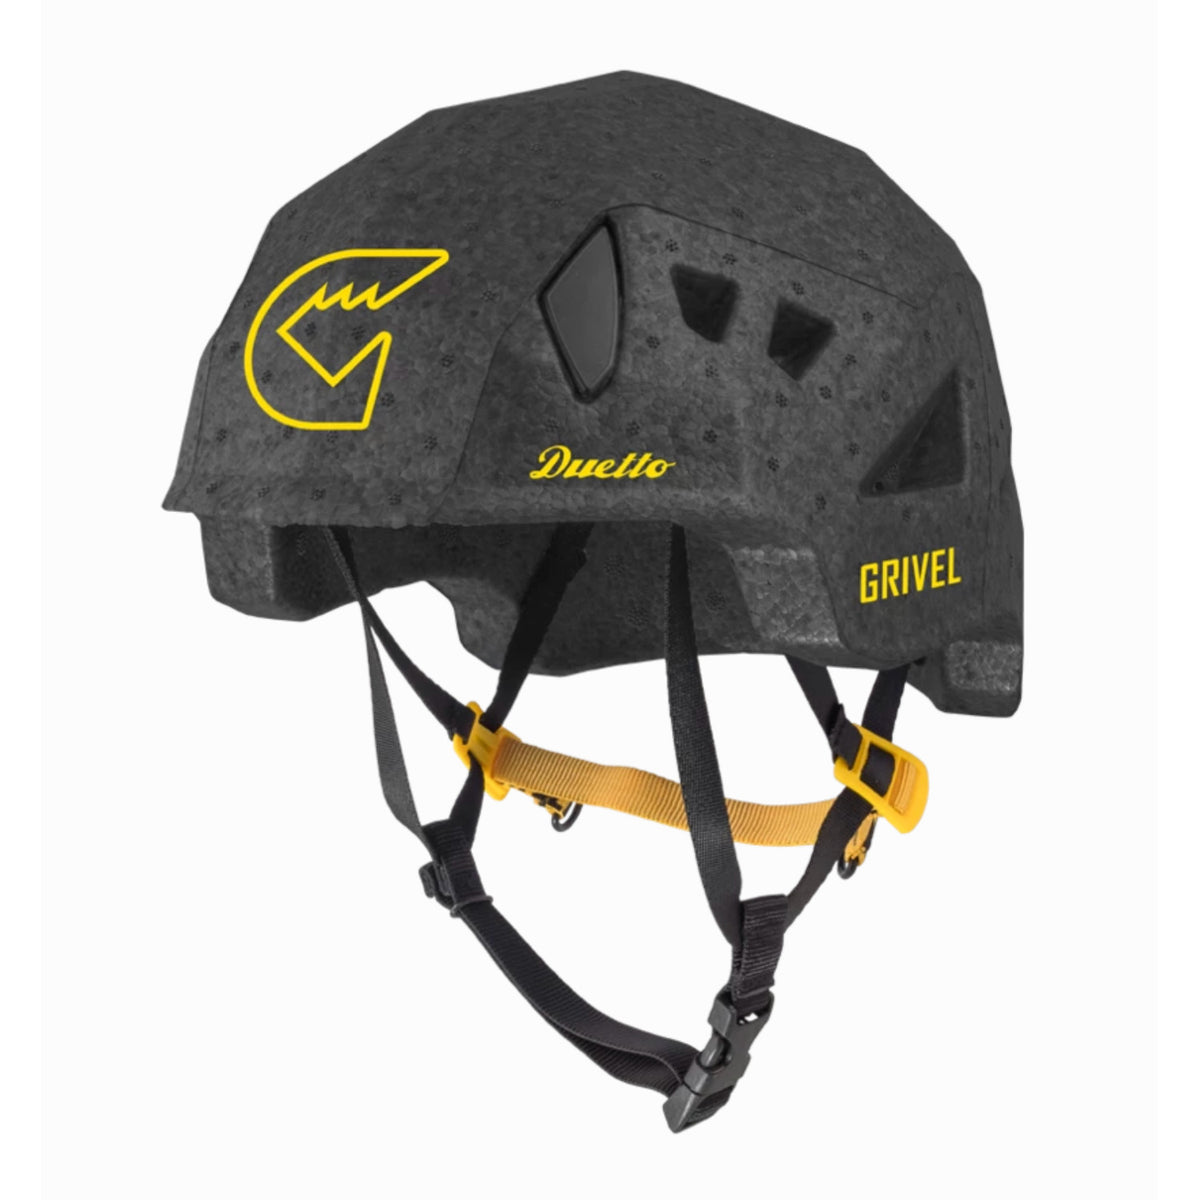 Grivel Duetto climbing and skiing helmet, front/side view in black colour